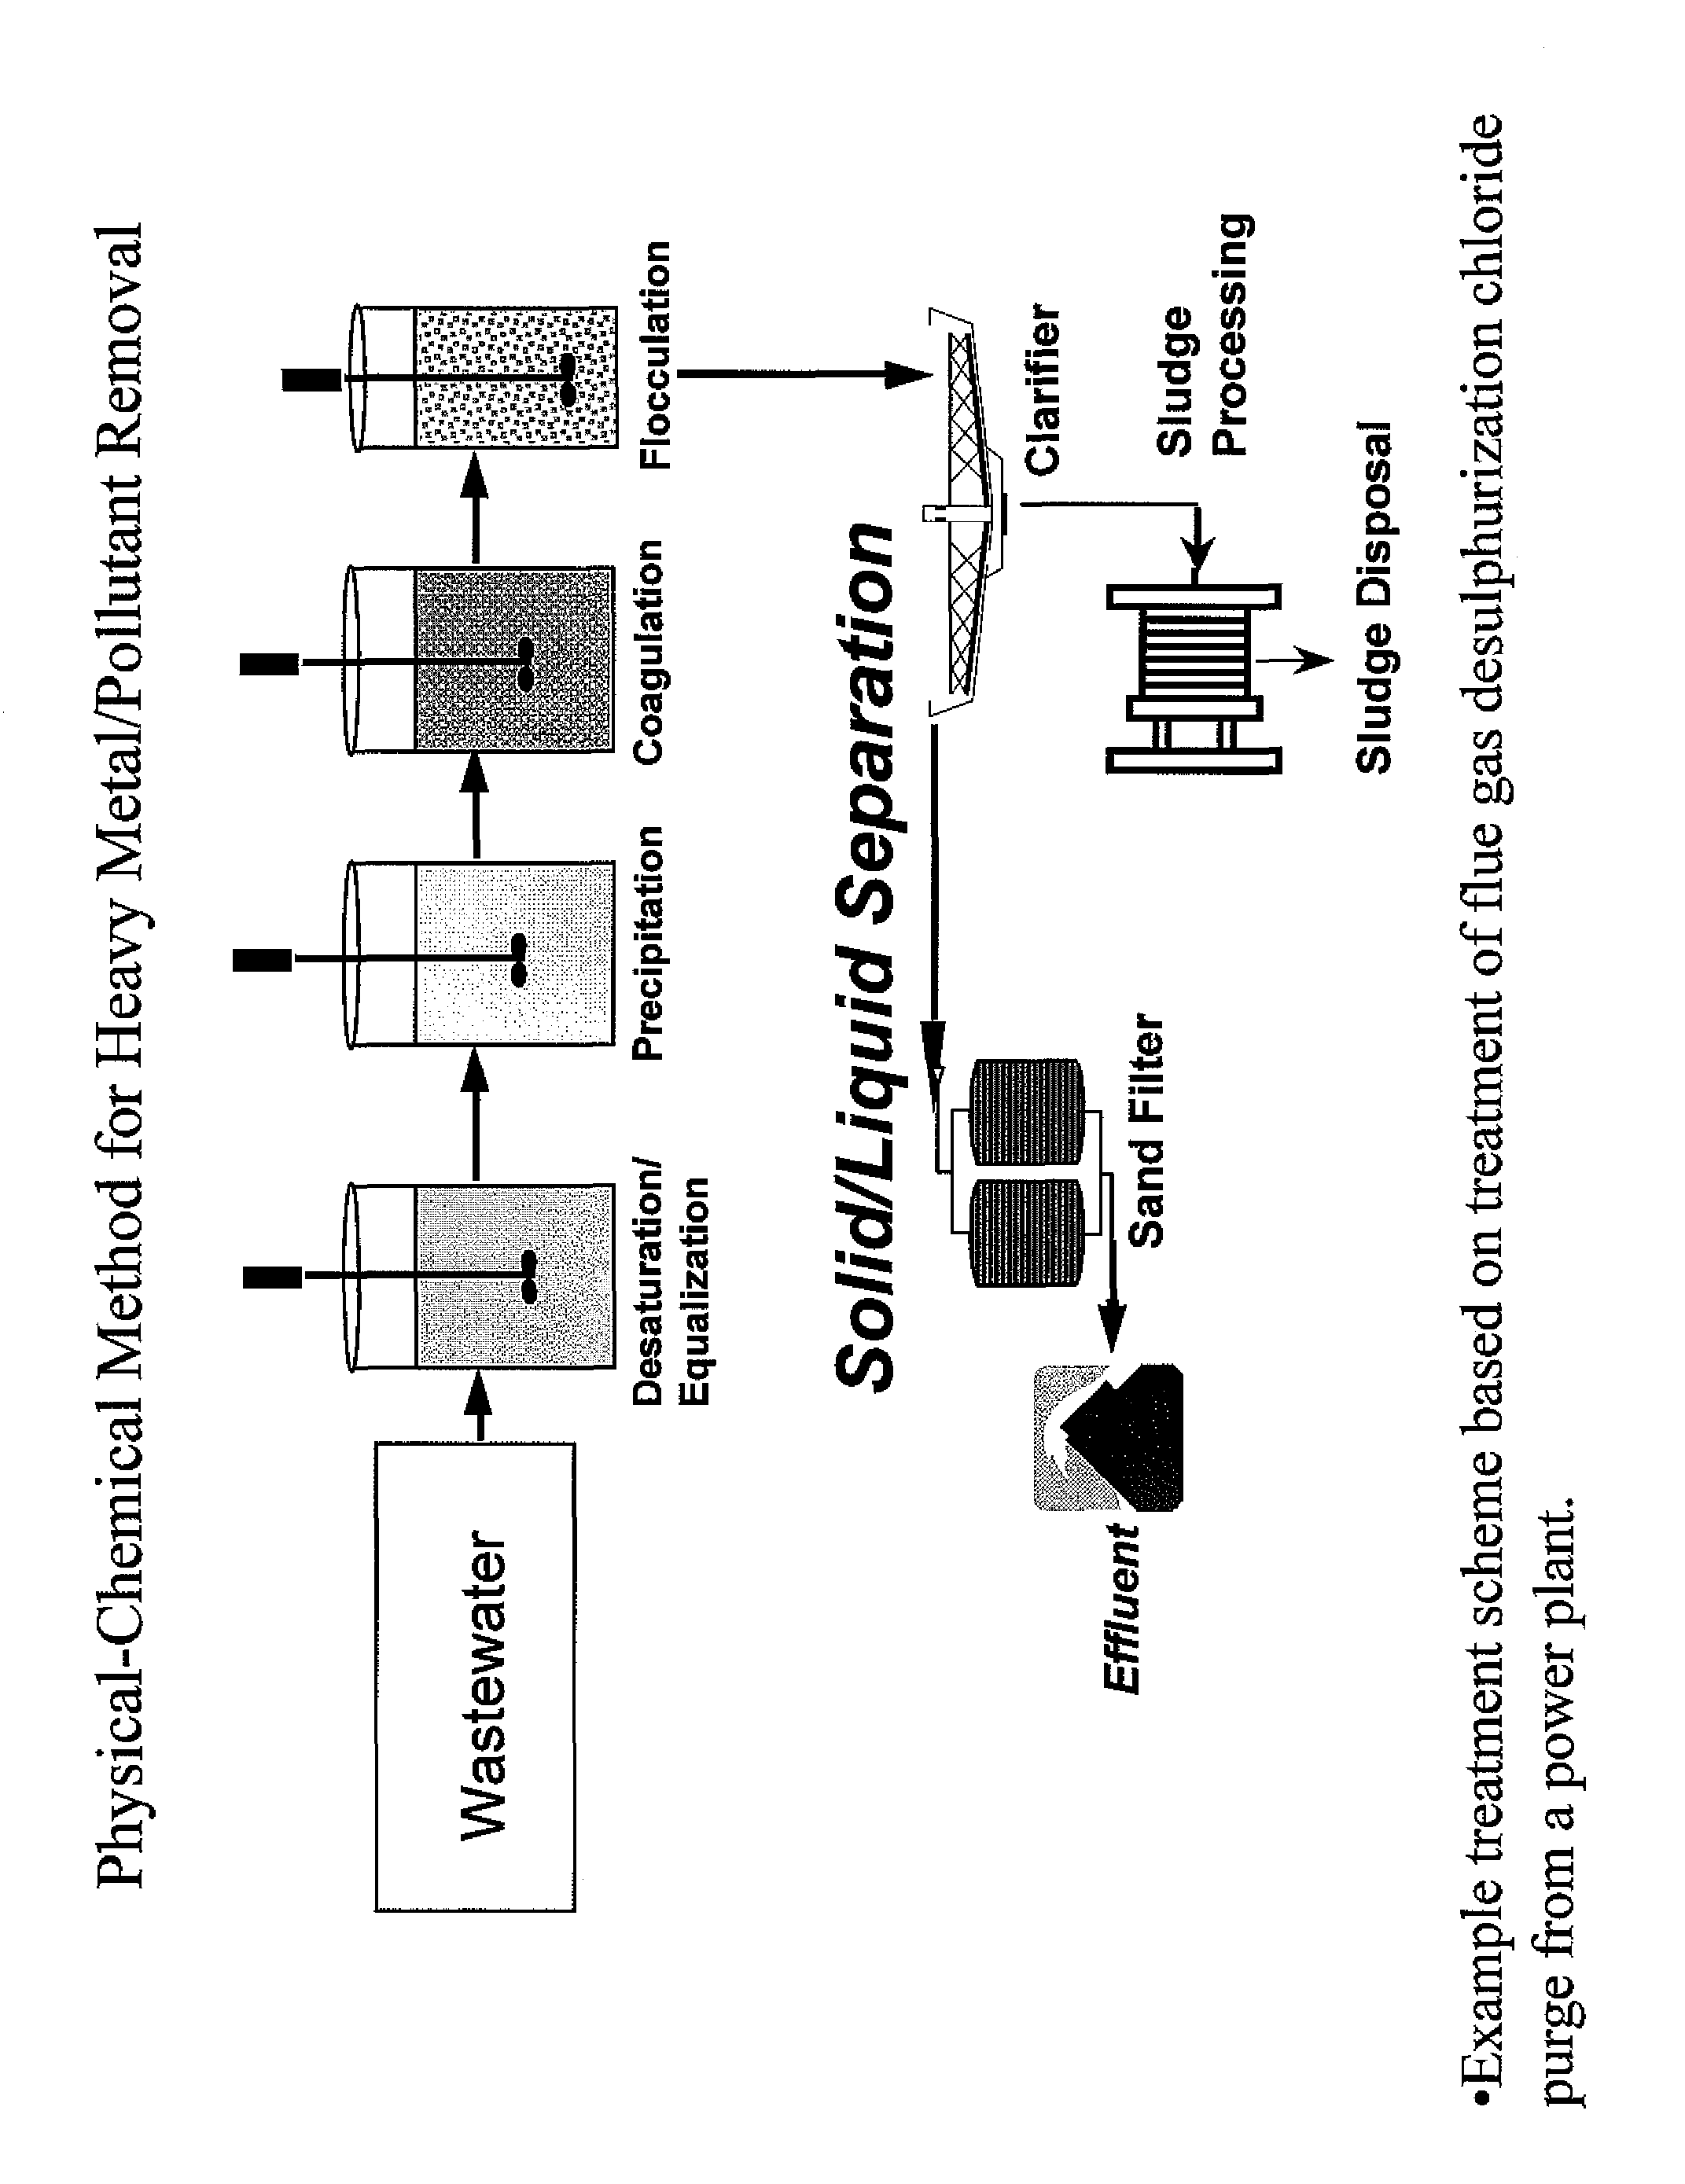 Metal scavenging polymers and uses thereof